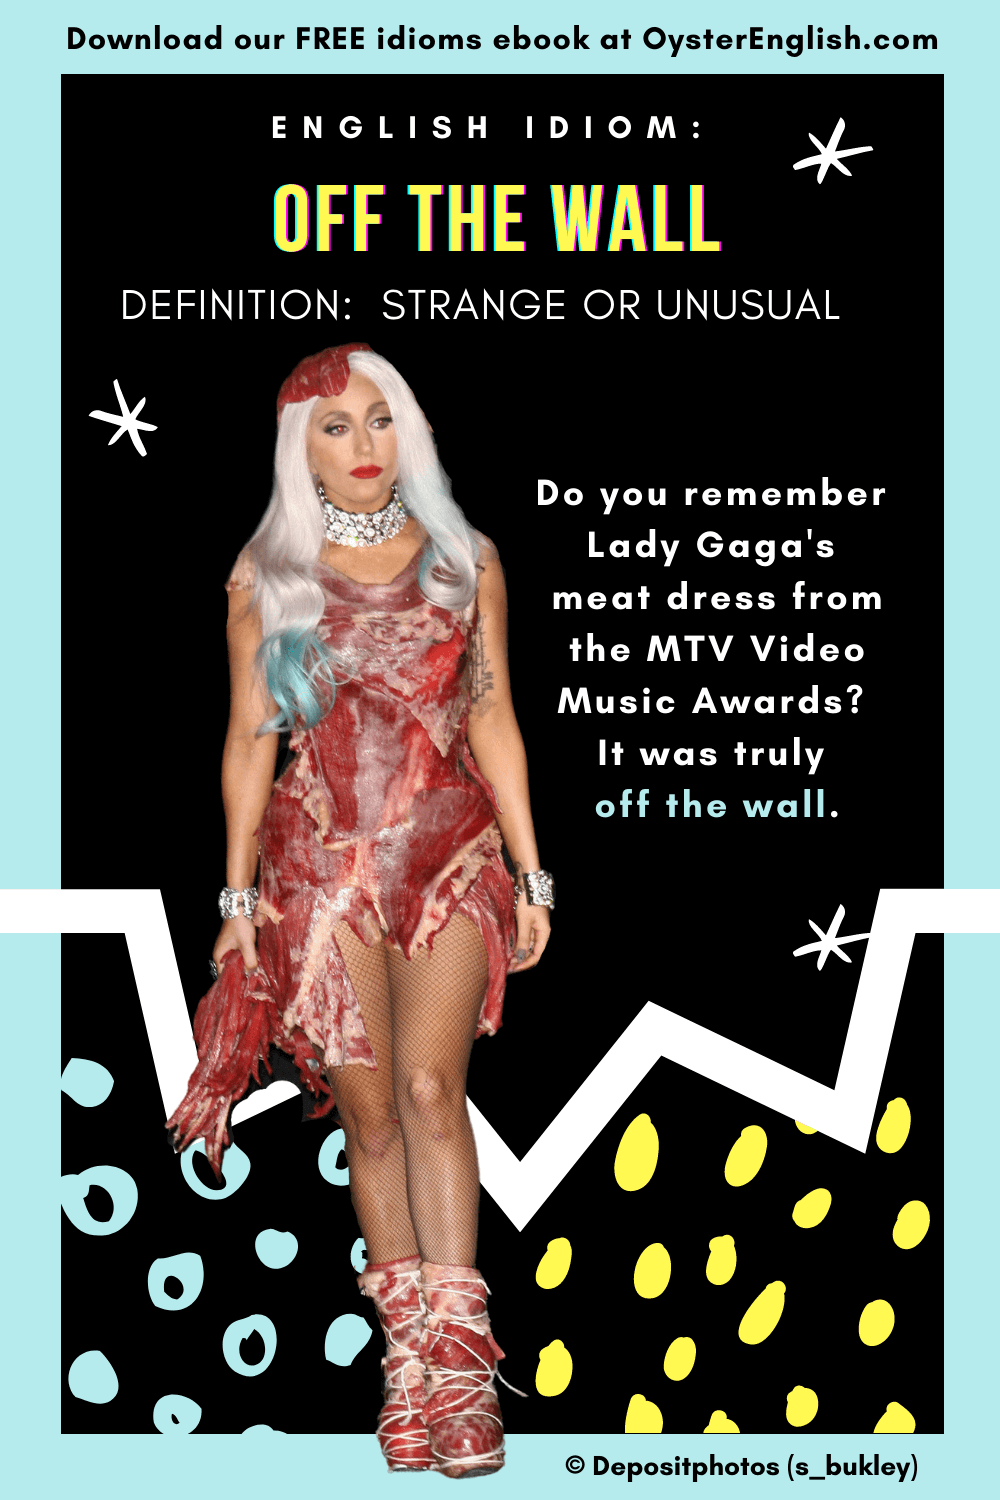 Photo of singer Lady Gaga wearing a cocktail dress, hat and boots made of raw meat. Do you remember Lady Gaga's meat dress from the MTV Video Music Awards? It was truly off the wall.